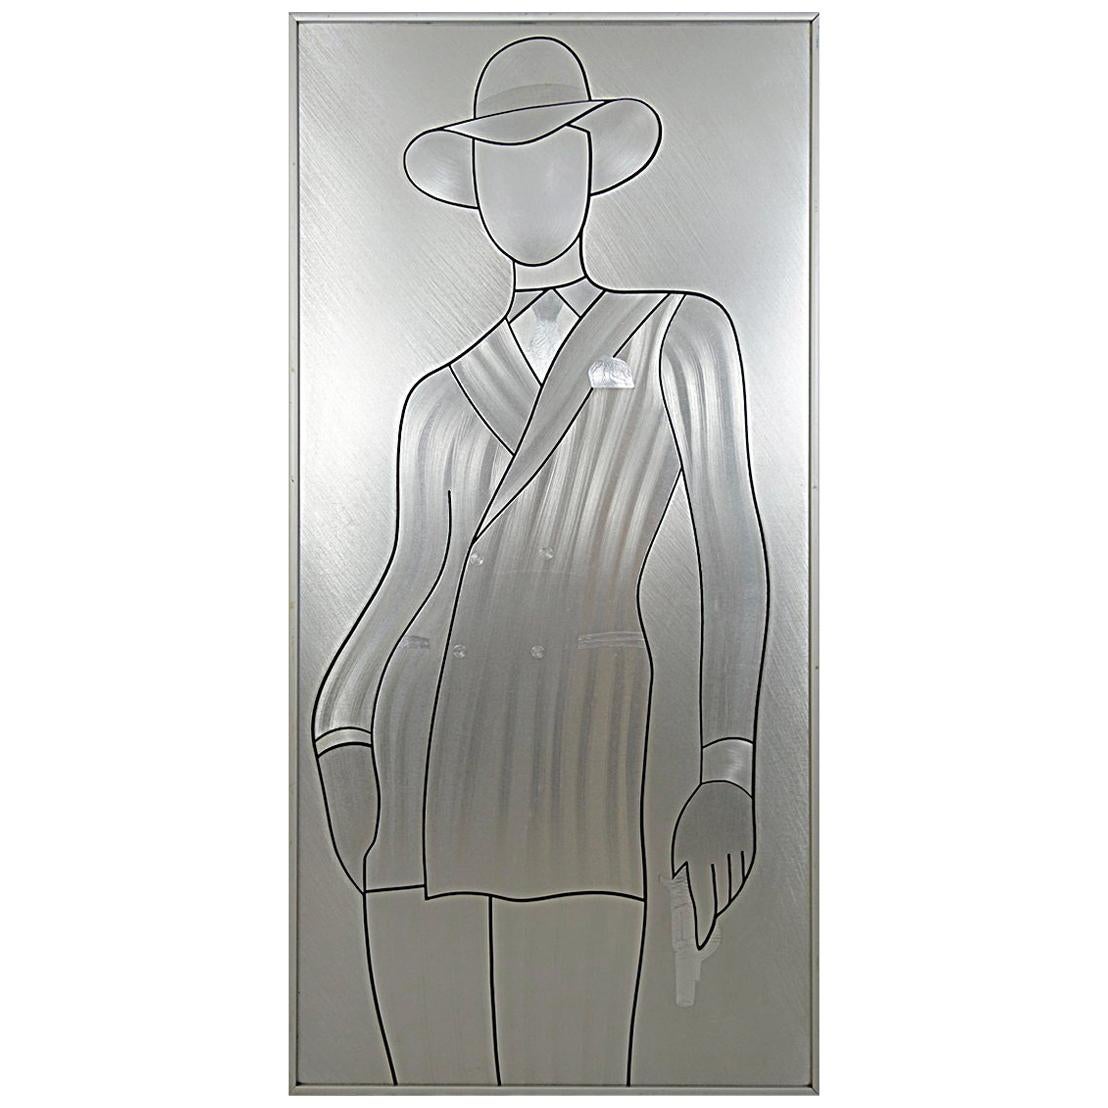 David Bowie Wall Piece Etched in Aluminium